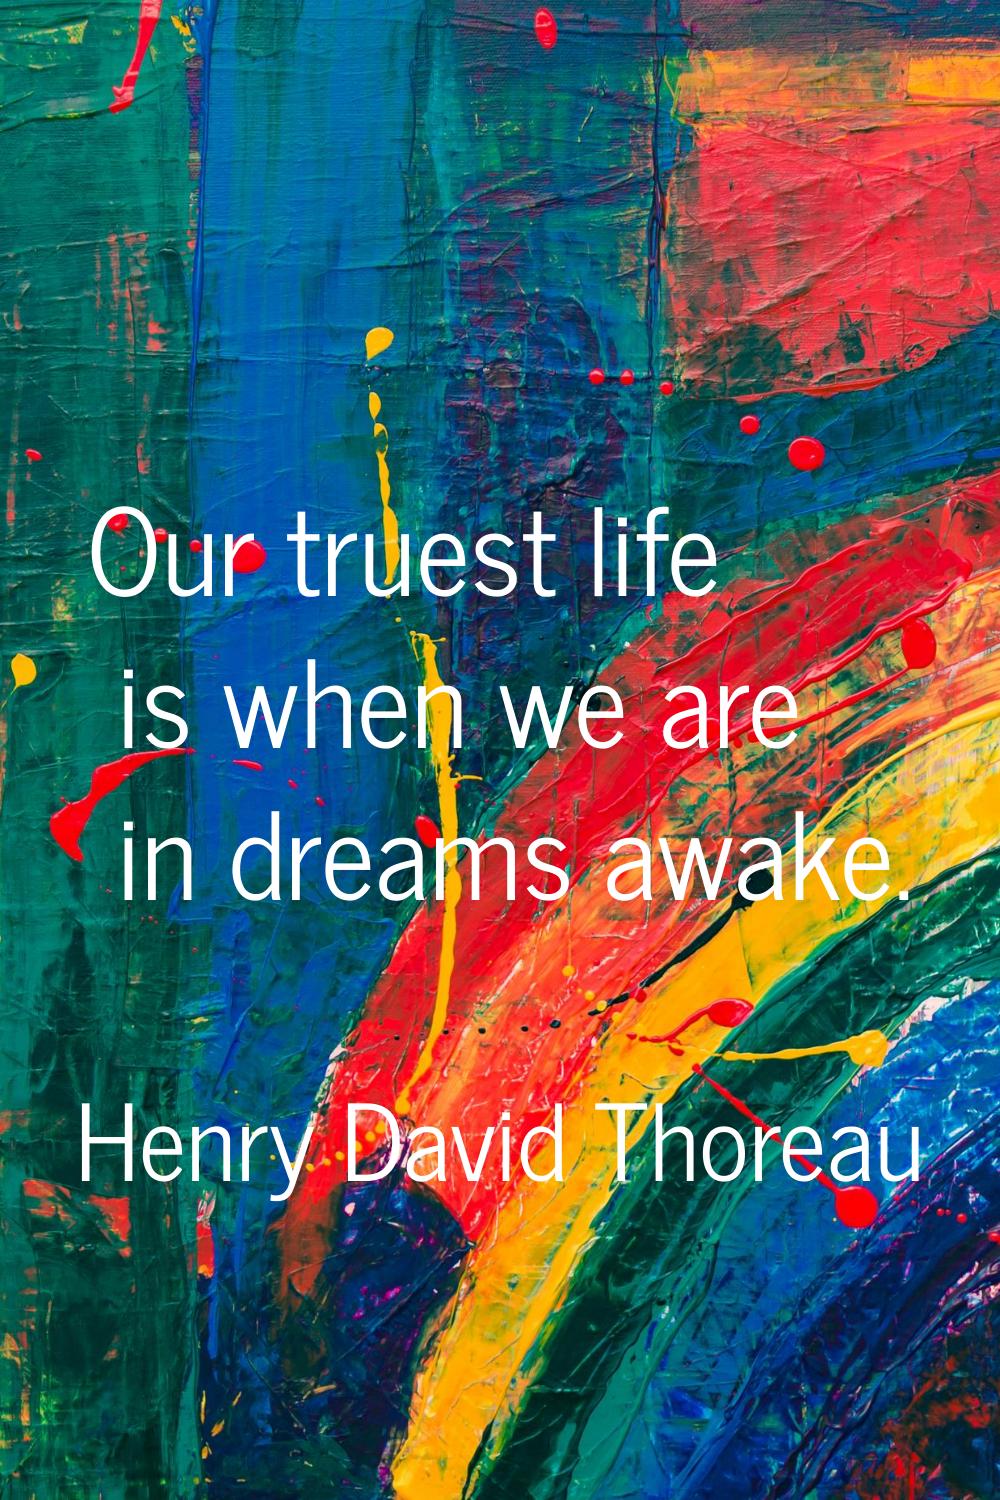 Our truest life is when we are in dreams awake.